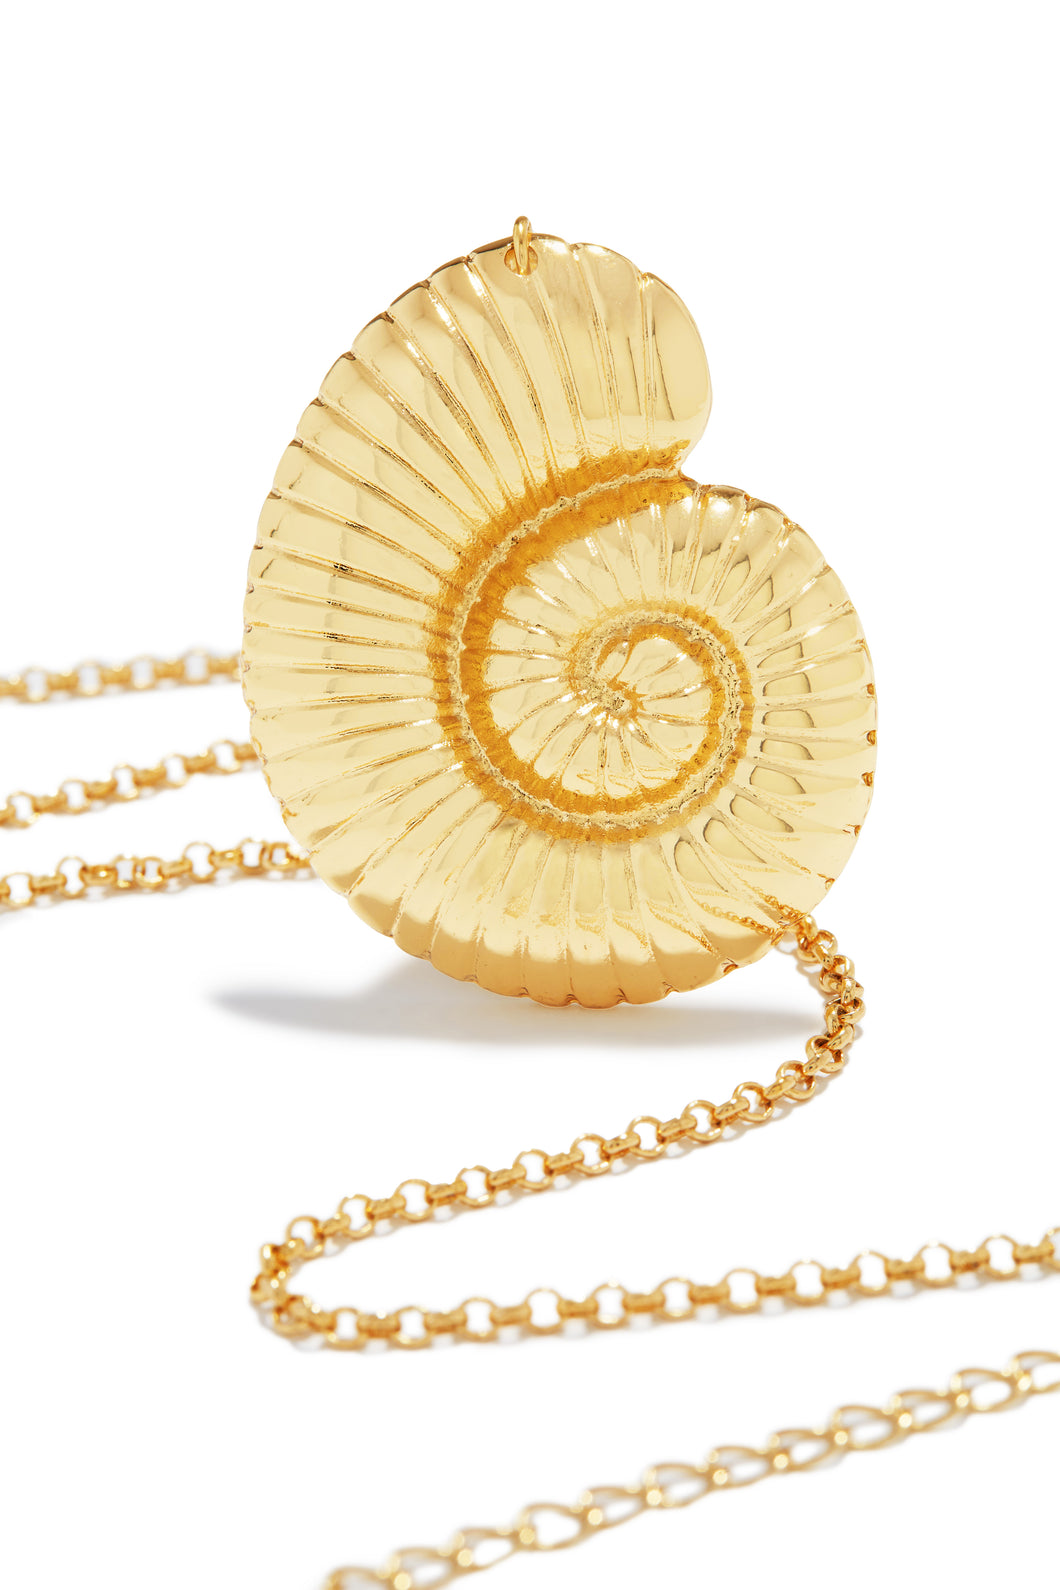 Gold Waves Sea Shell Necklace - Gold